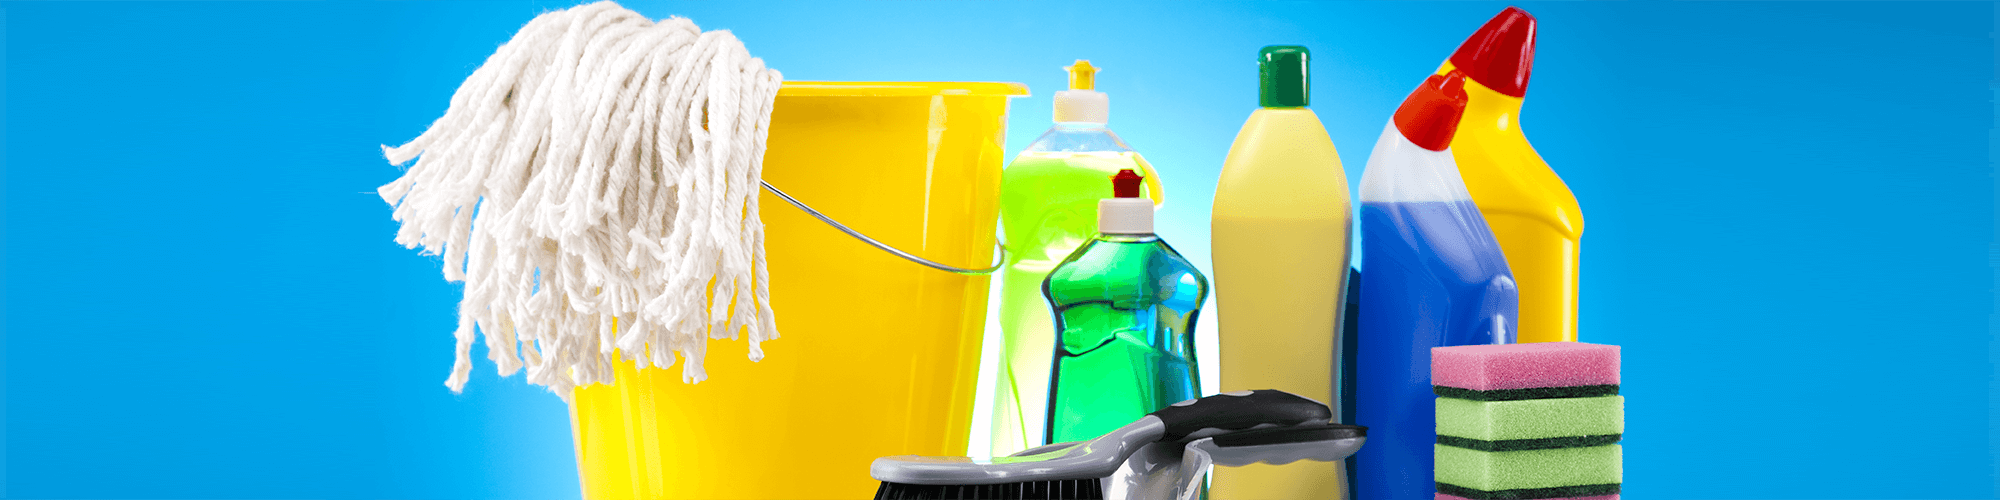 Professional Janitorial Companies in Jacksonville